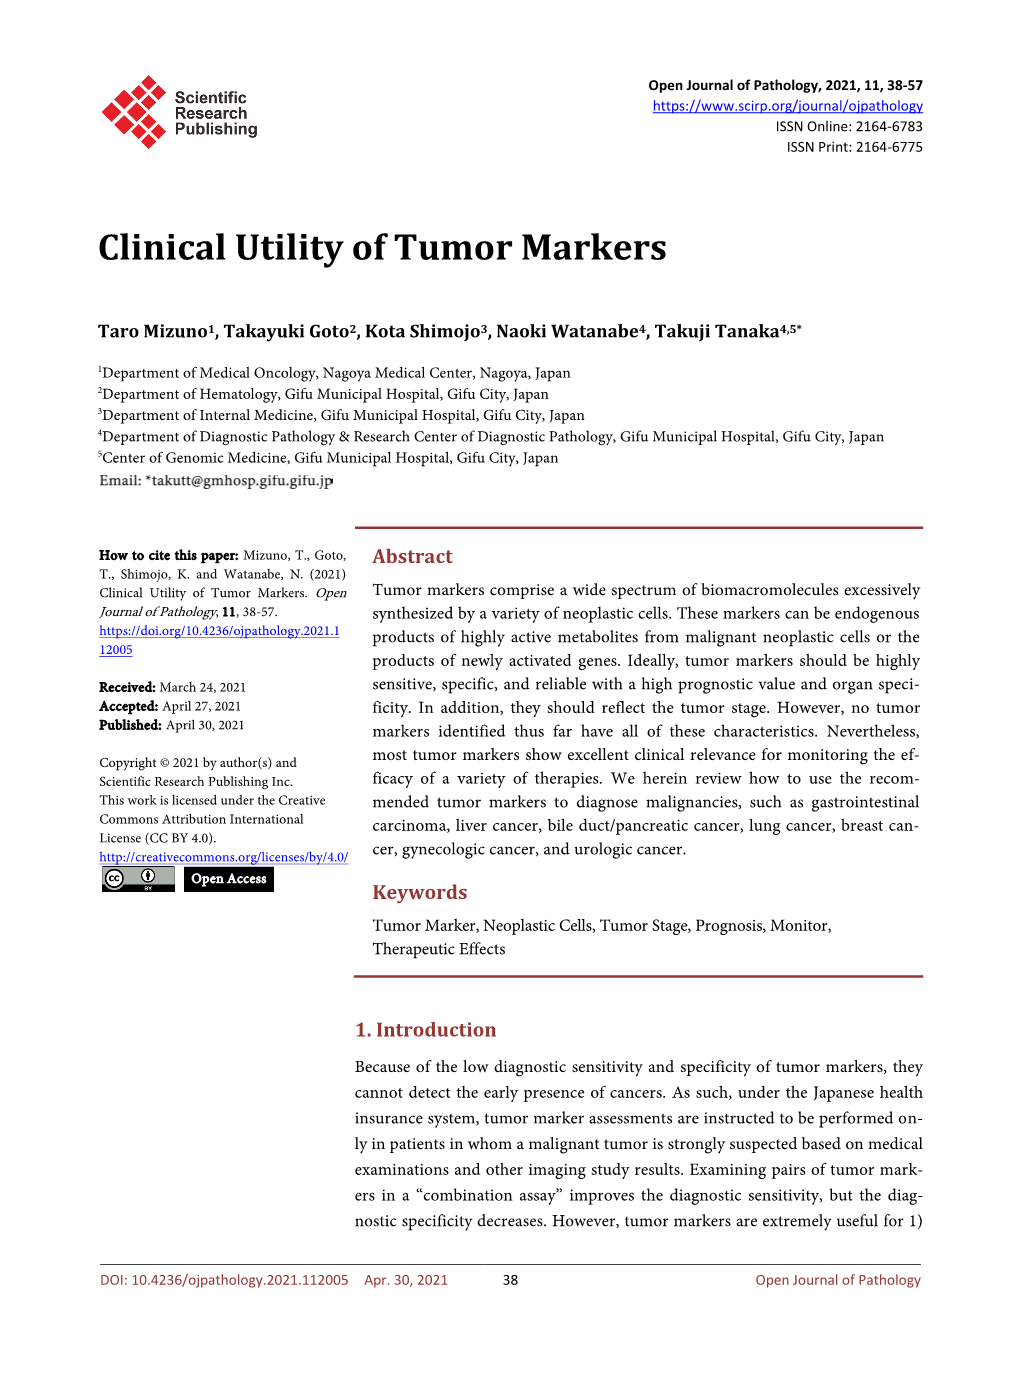 Clinical Utility of Tumor Markers